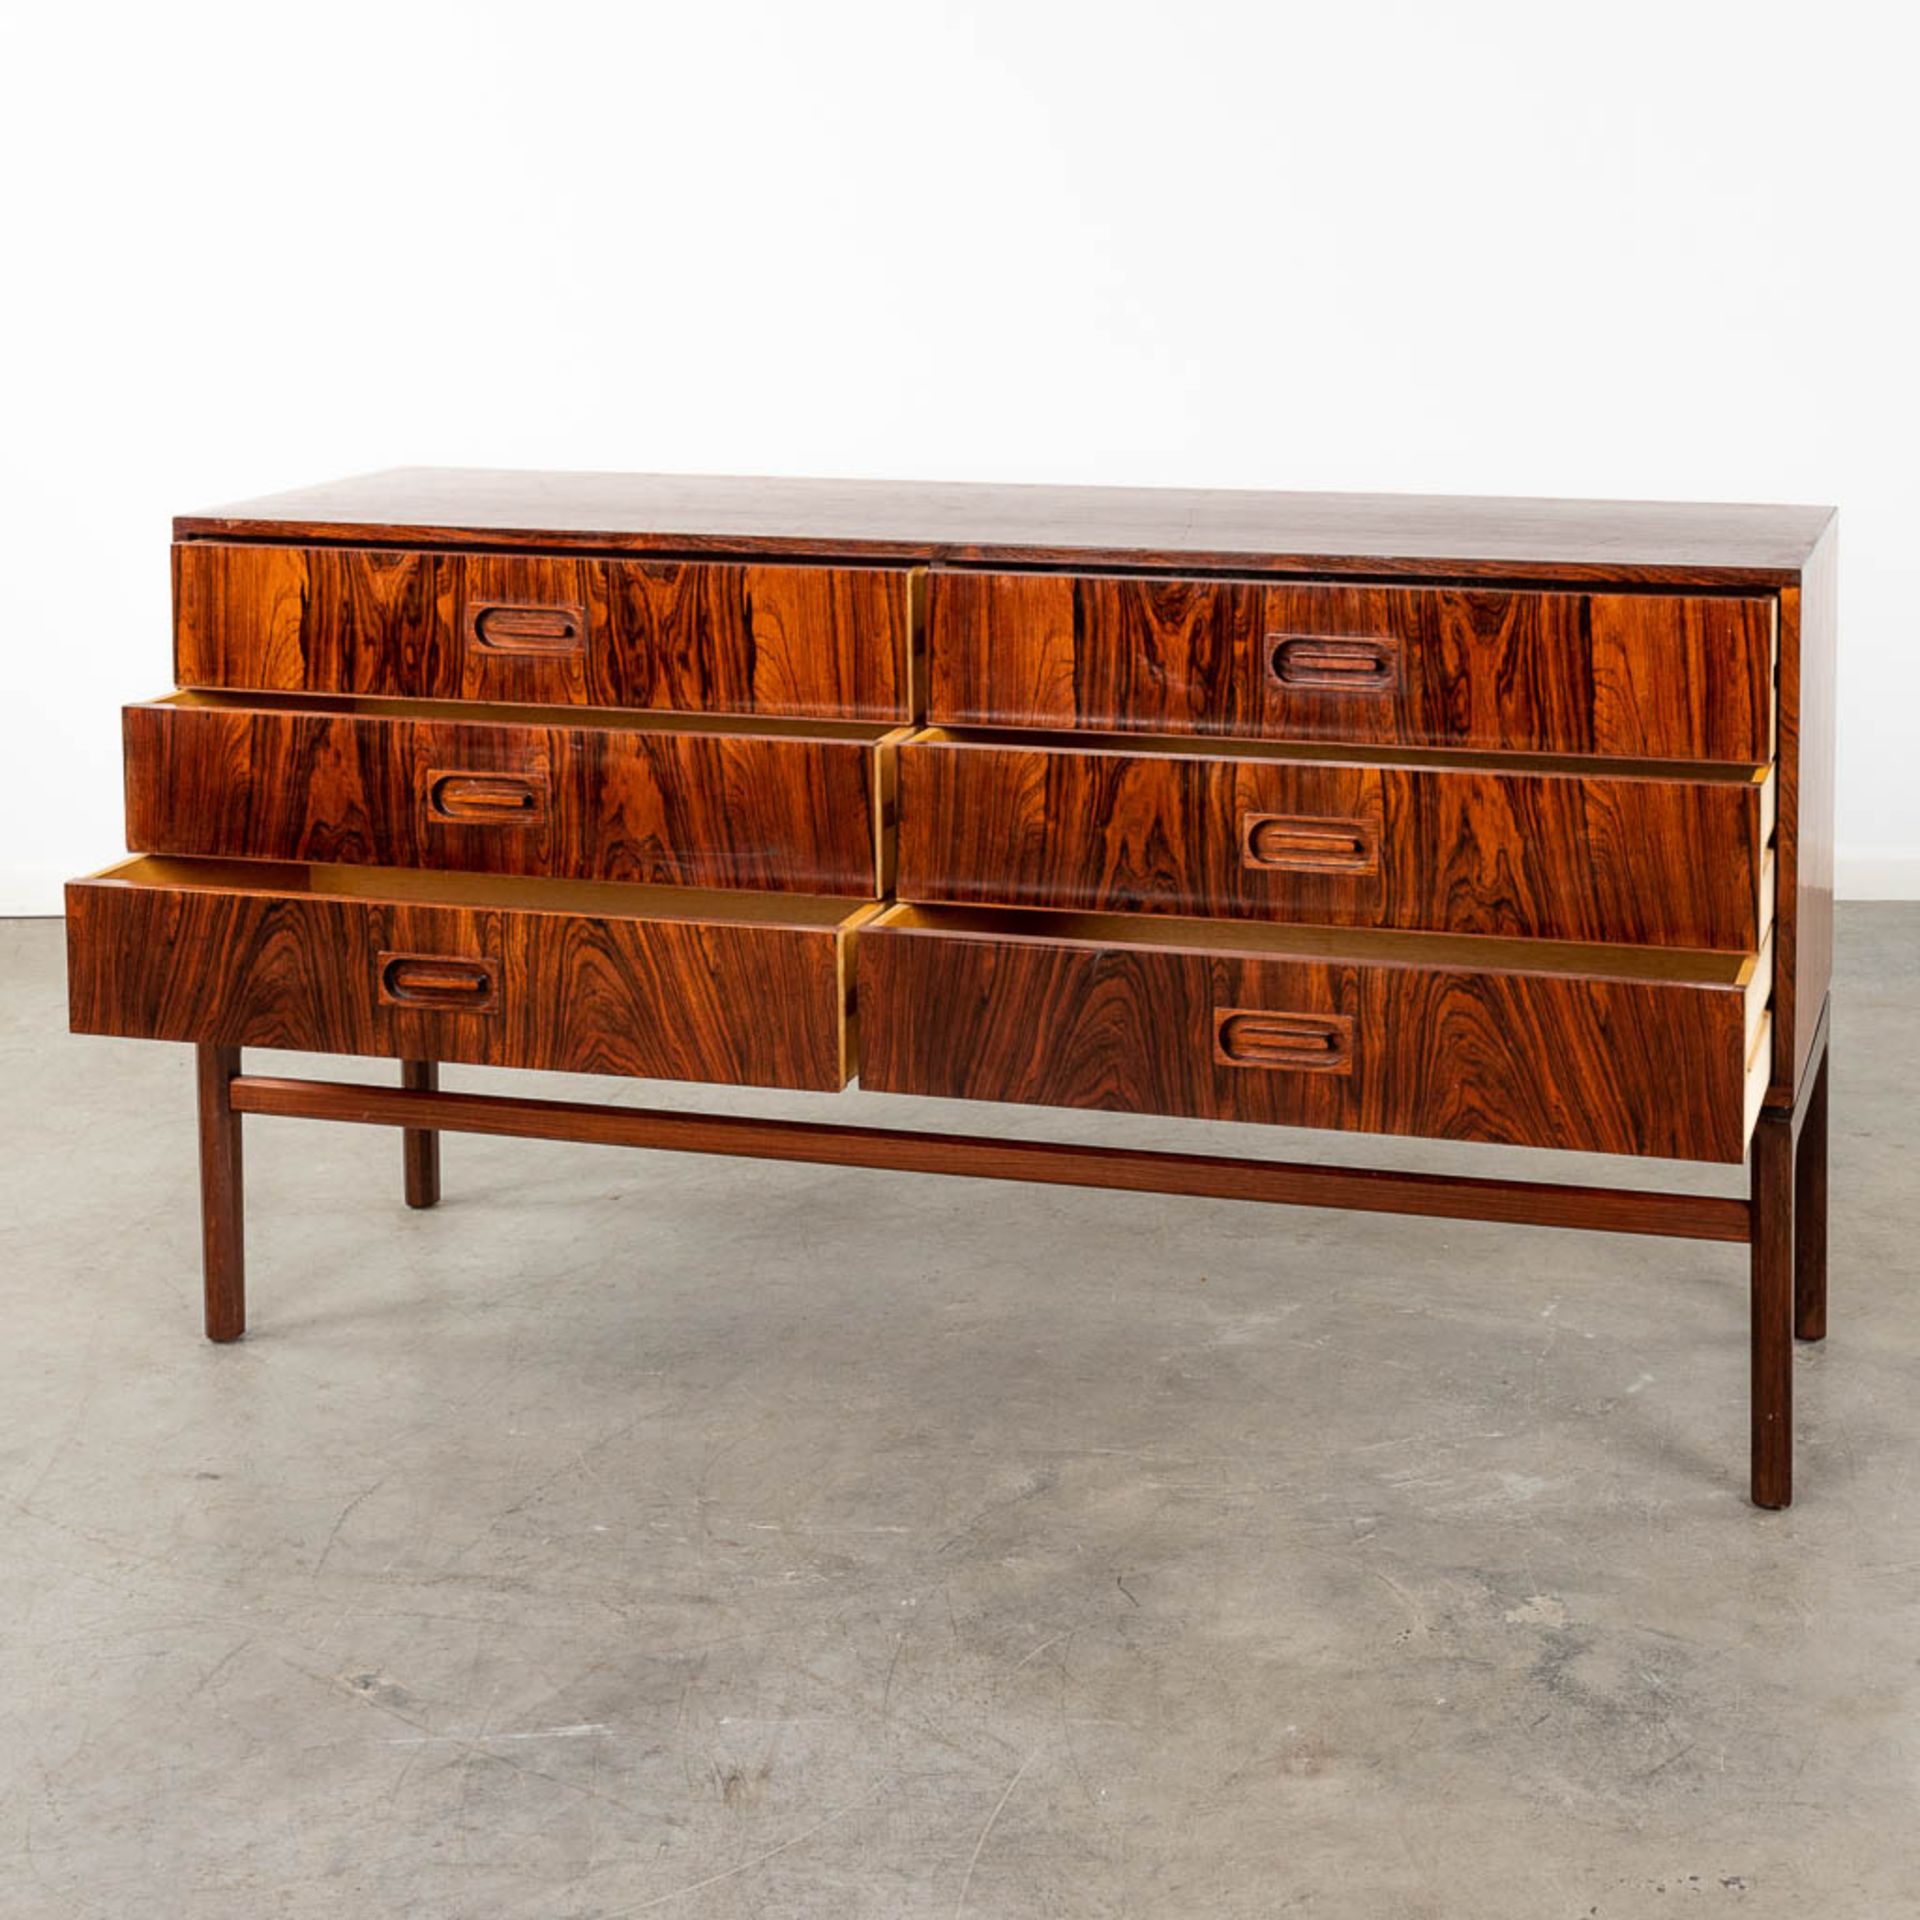 A mid-century Scandinavian Sideboard with 6 drawers, and rosewood veneer. (D:45 x W:150 x H:80 cm) - Image 3 of 12